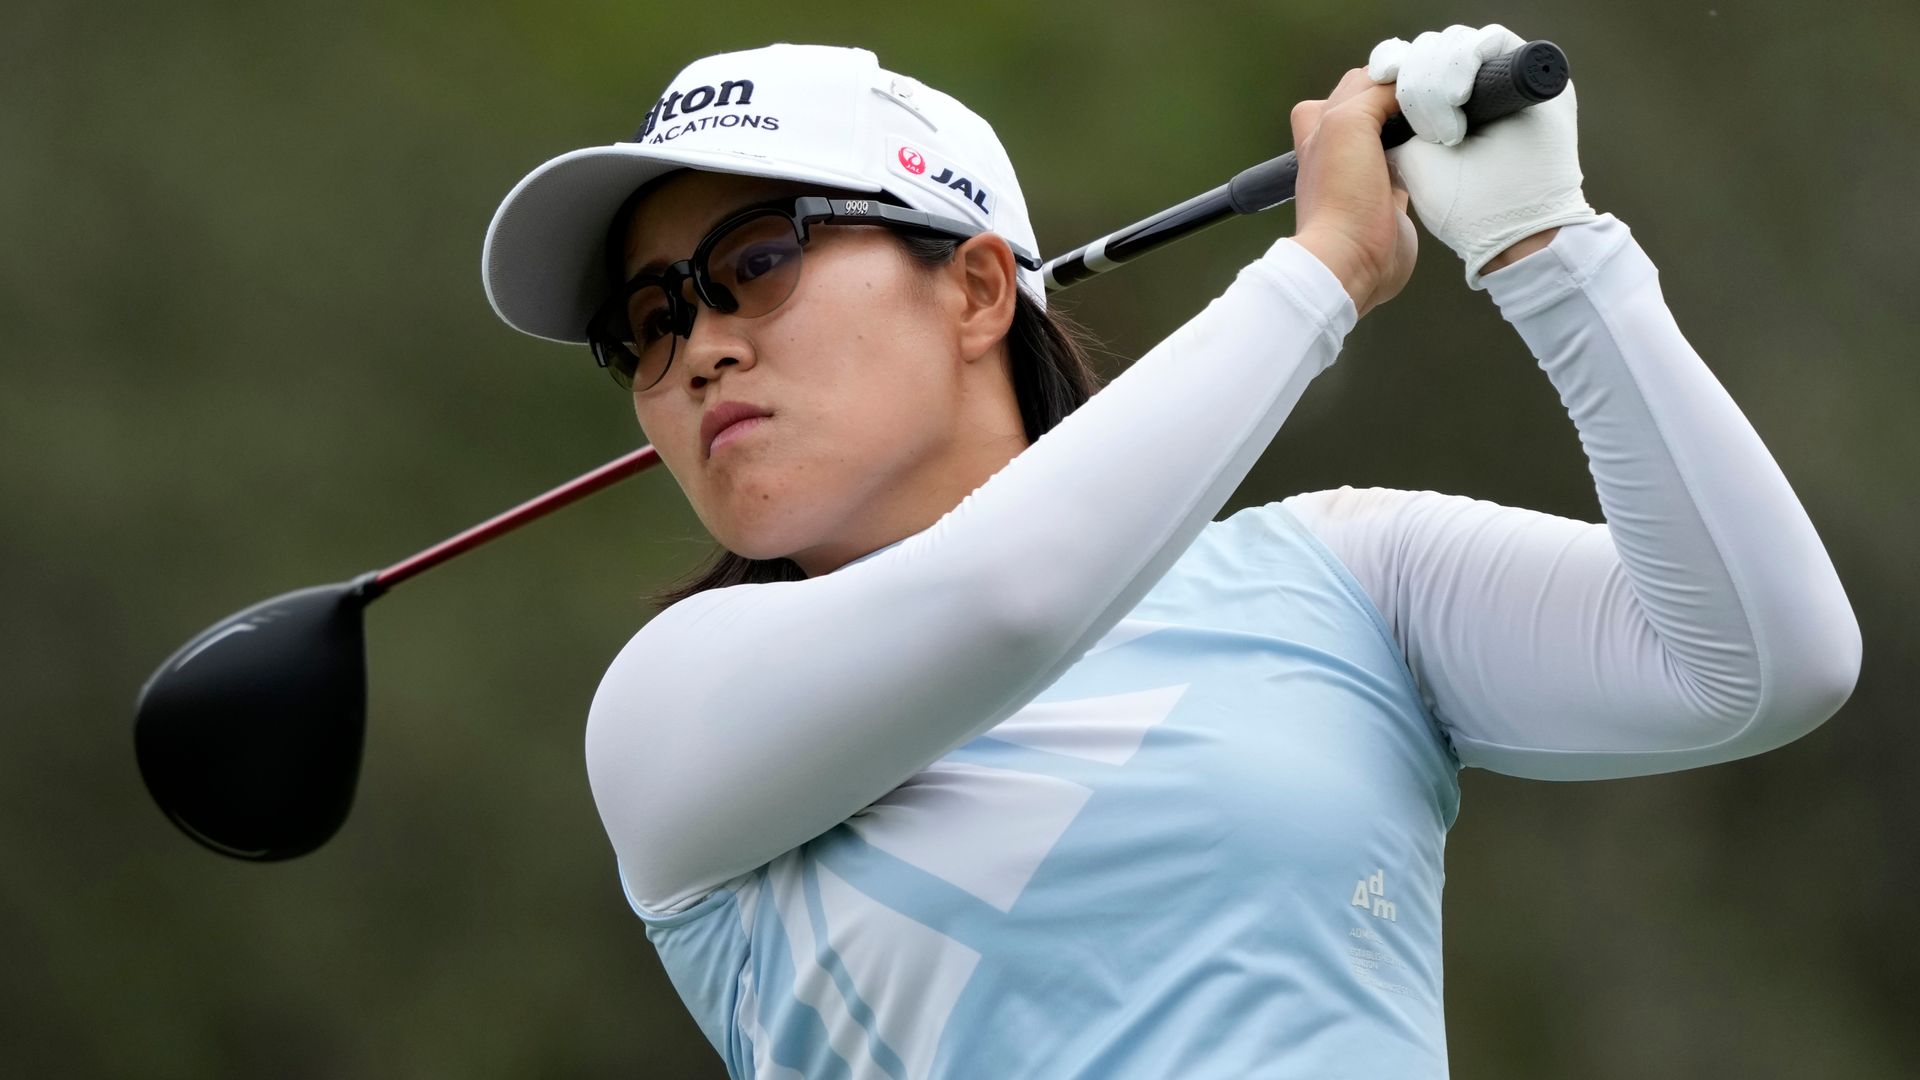 Hatakota and Yin share early lead at CME Group Tour Championship